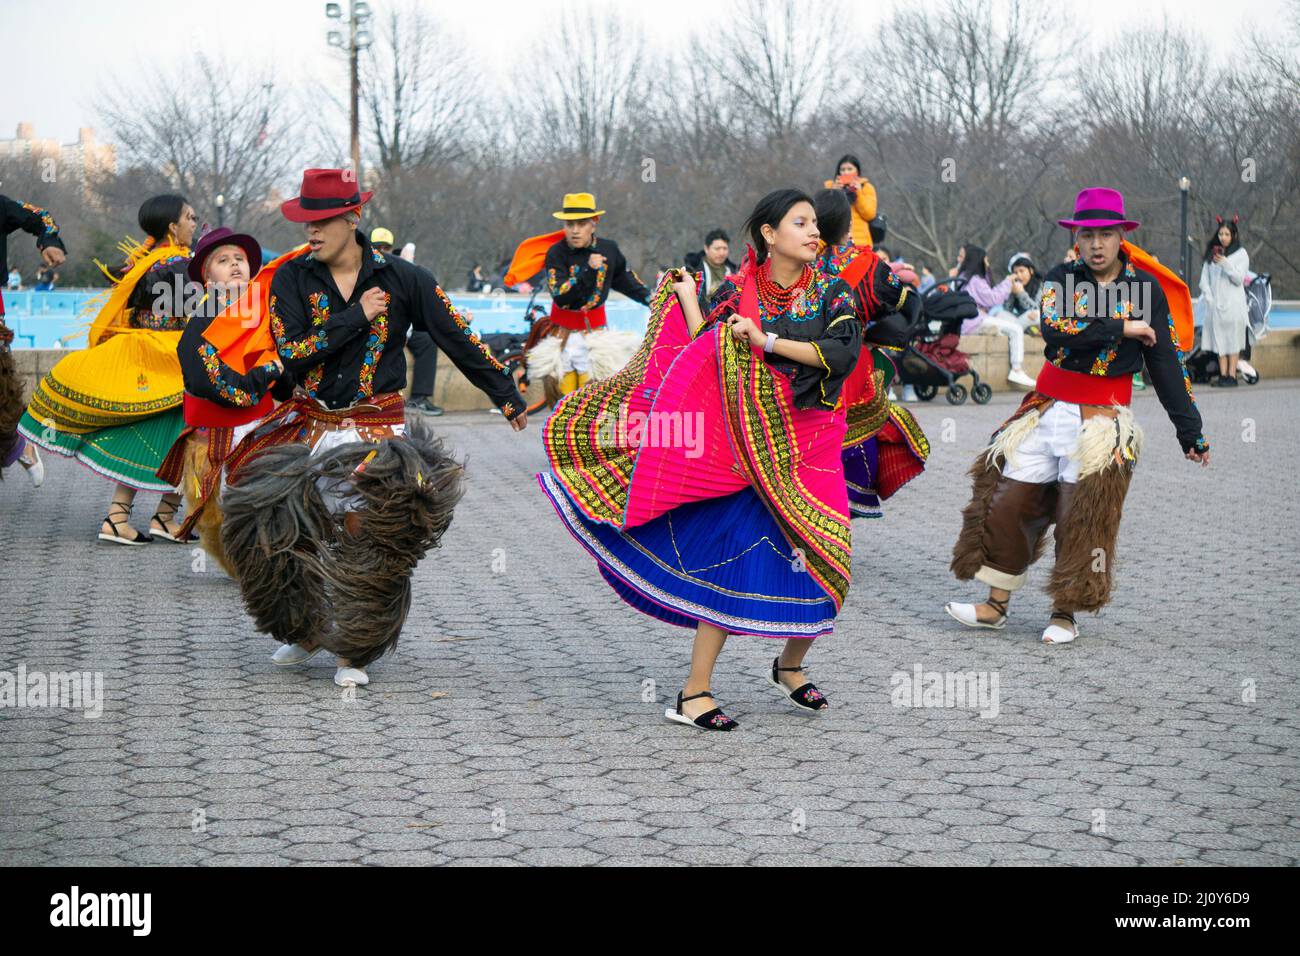 Dancers from Jatary Muzhucuna, an Ecuadorian American music & dance troupe, performs in Flushing Meadows in Queens, New York City. Stock Photo